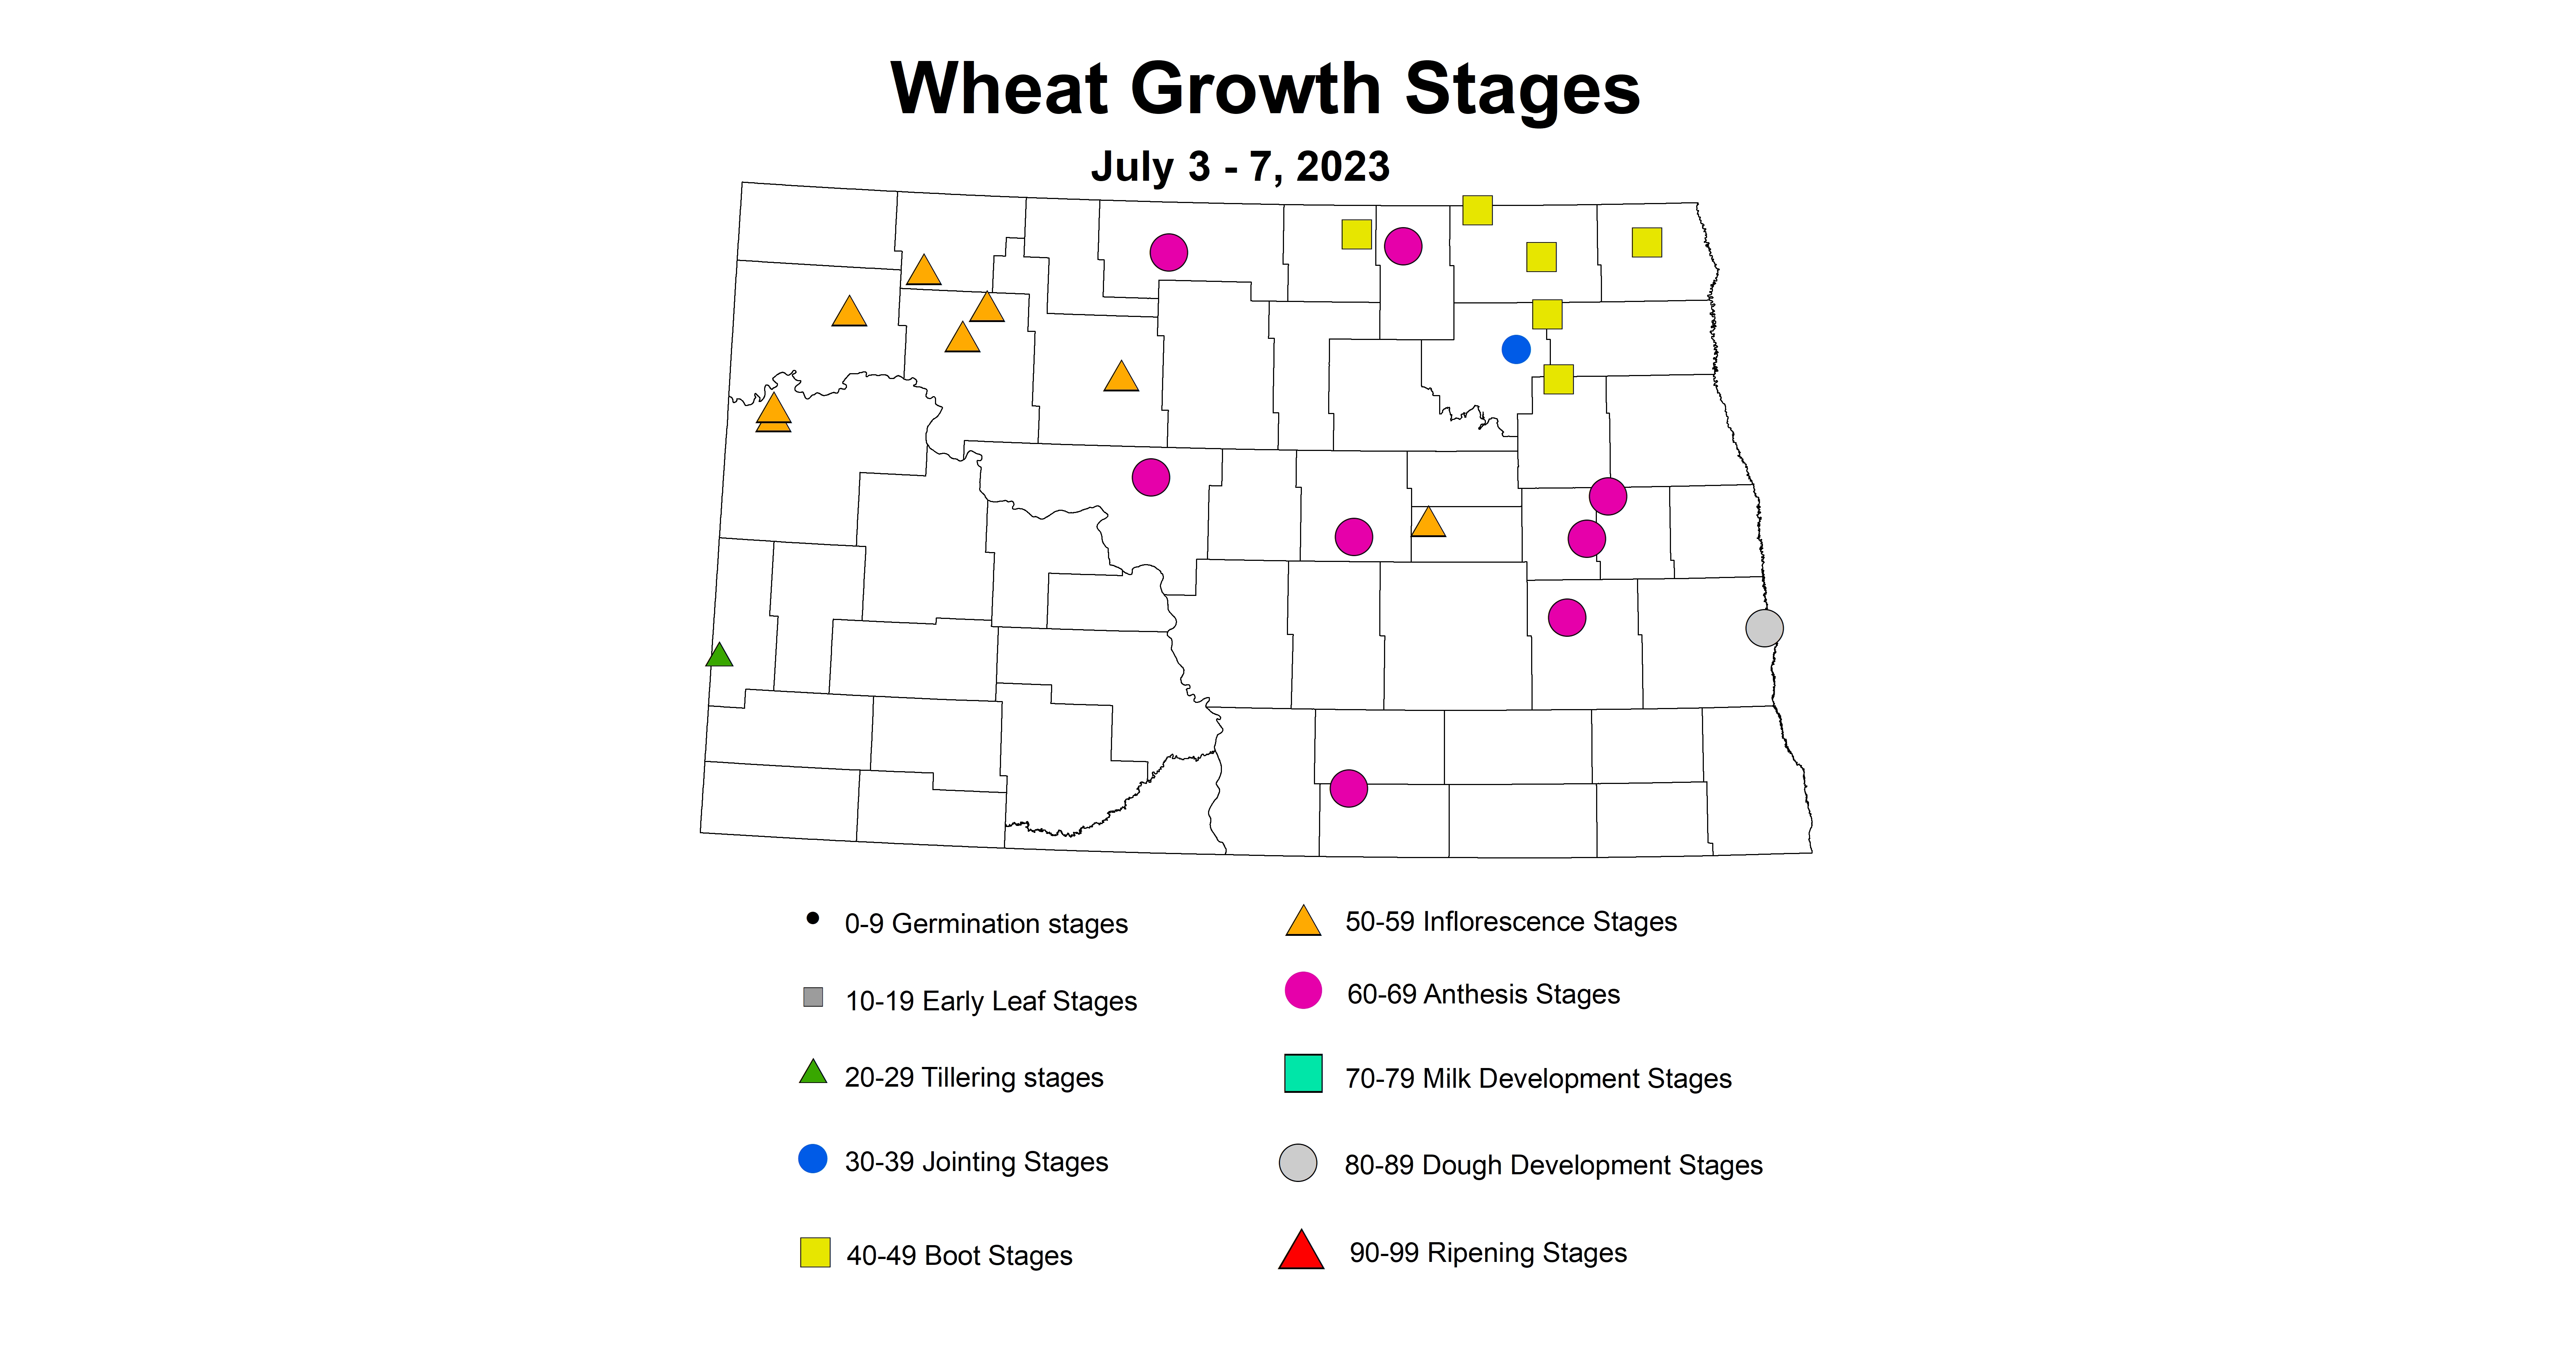 corrcted wheat insect trap growth stages July 3-7 2023